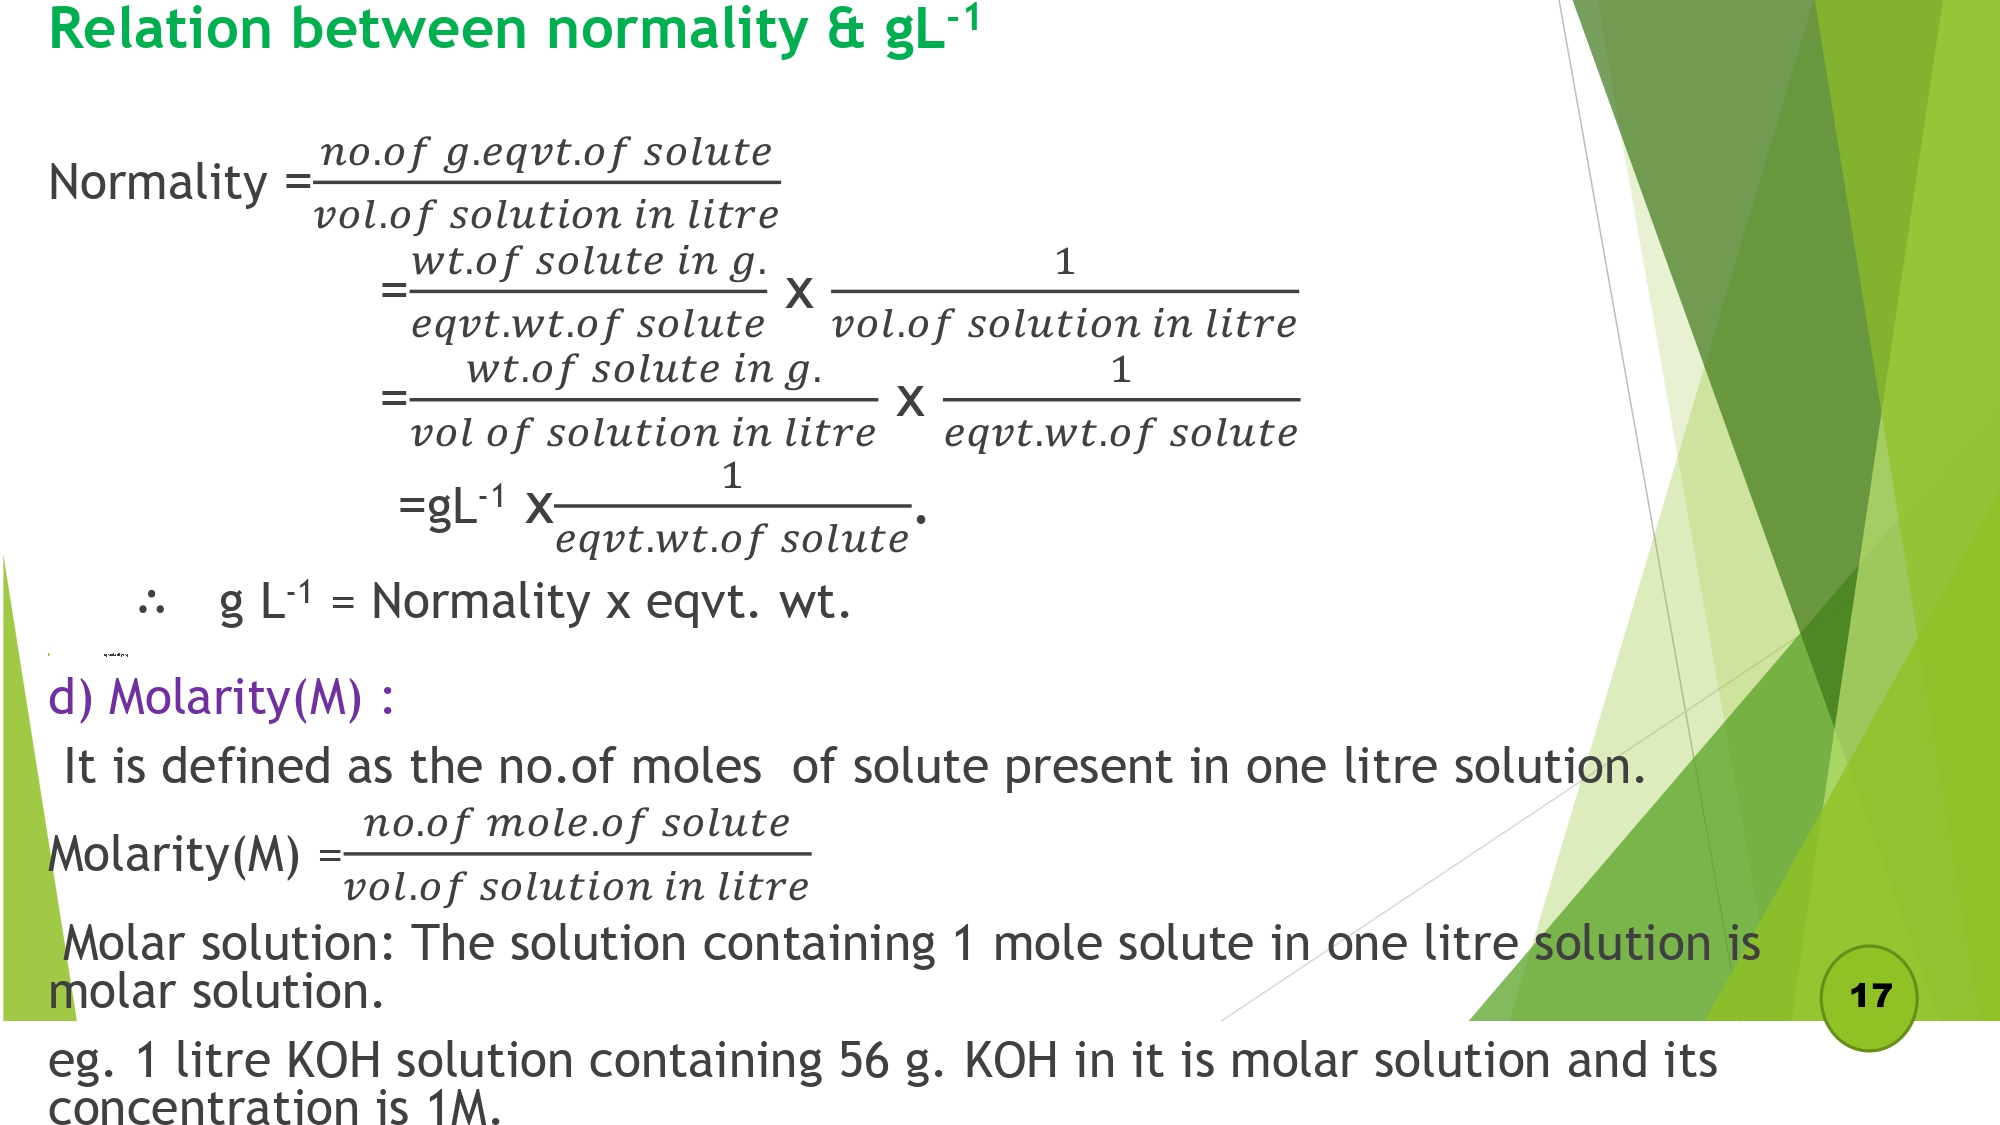 Relation between normality & gL-1